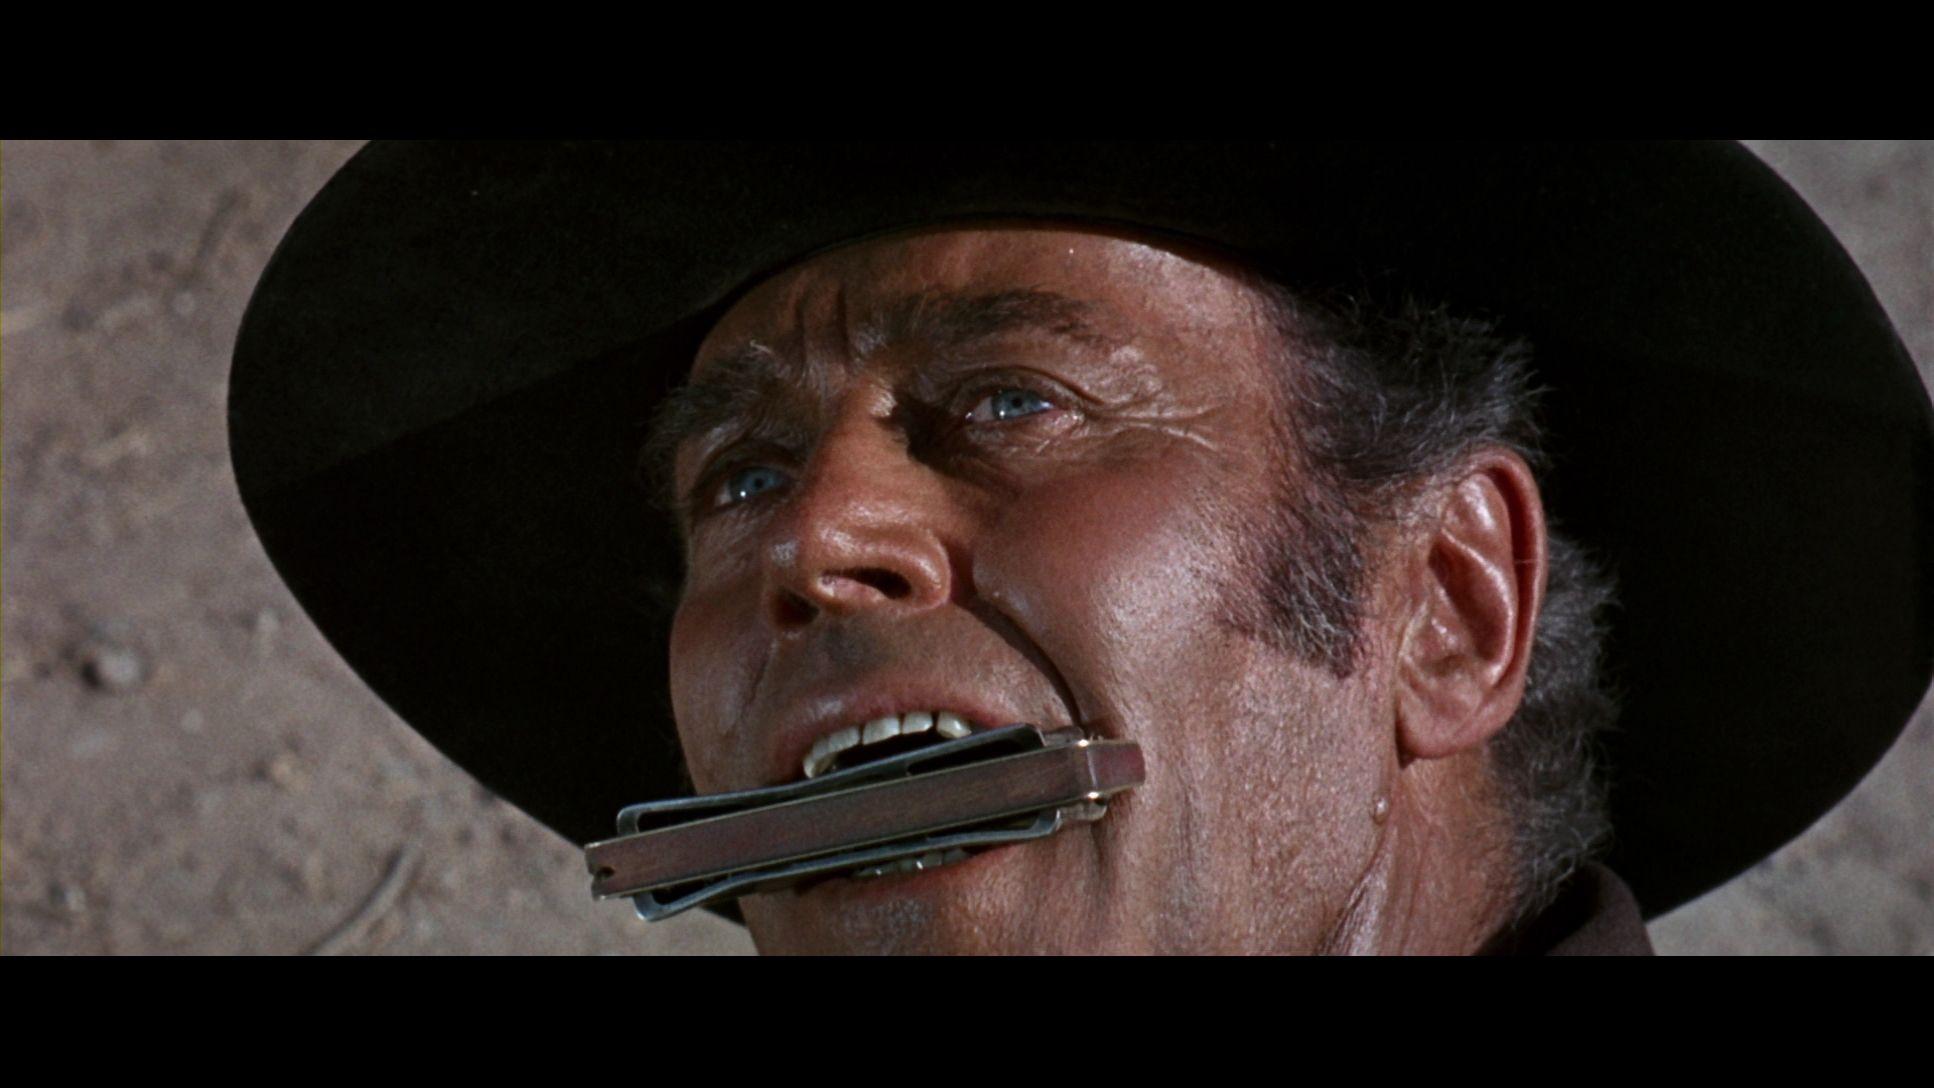 Once Upon a Time in the West. Frank realises who Harmonica